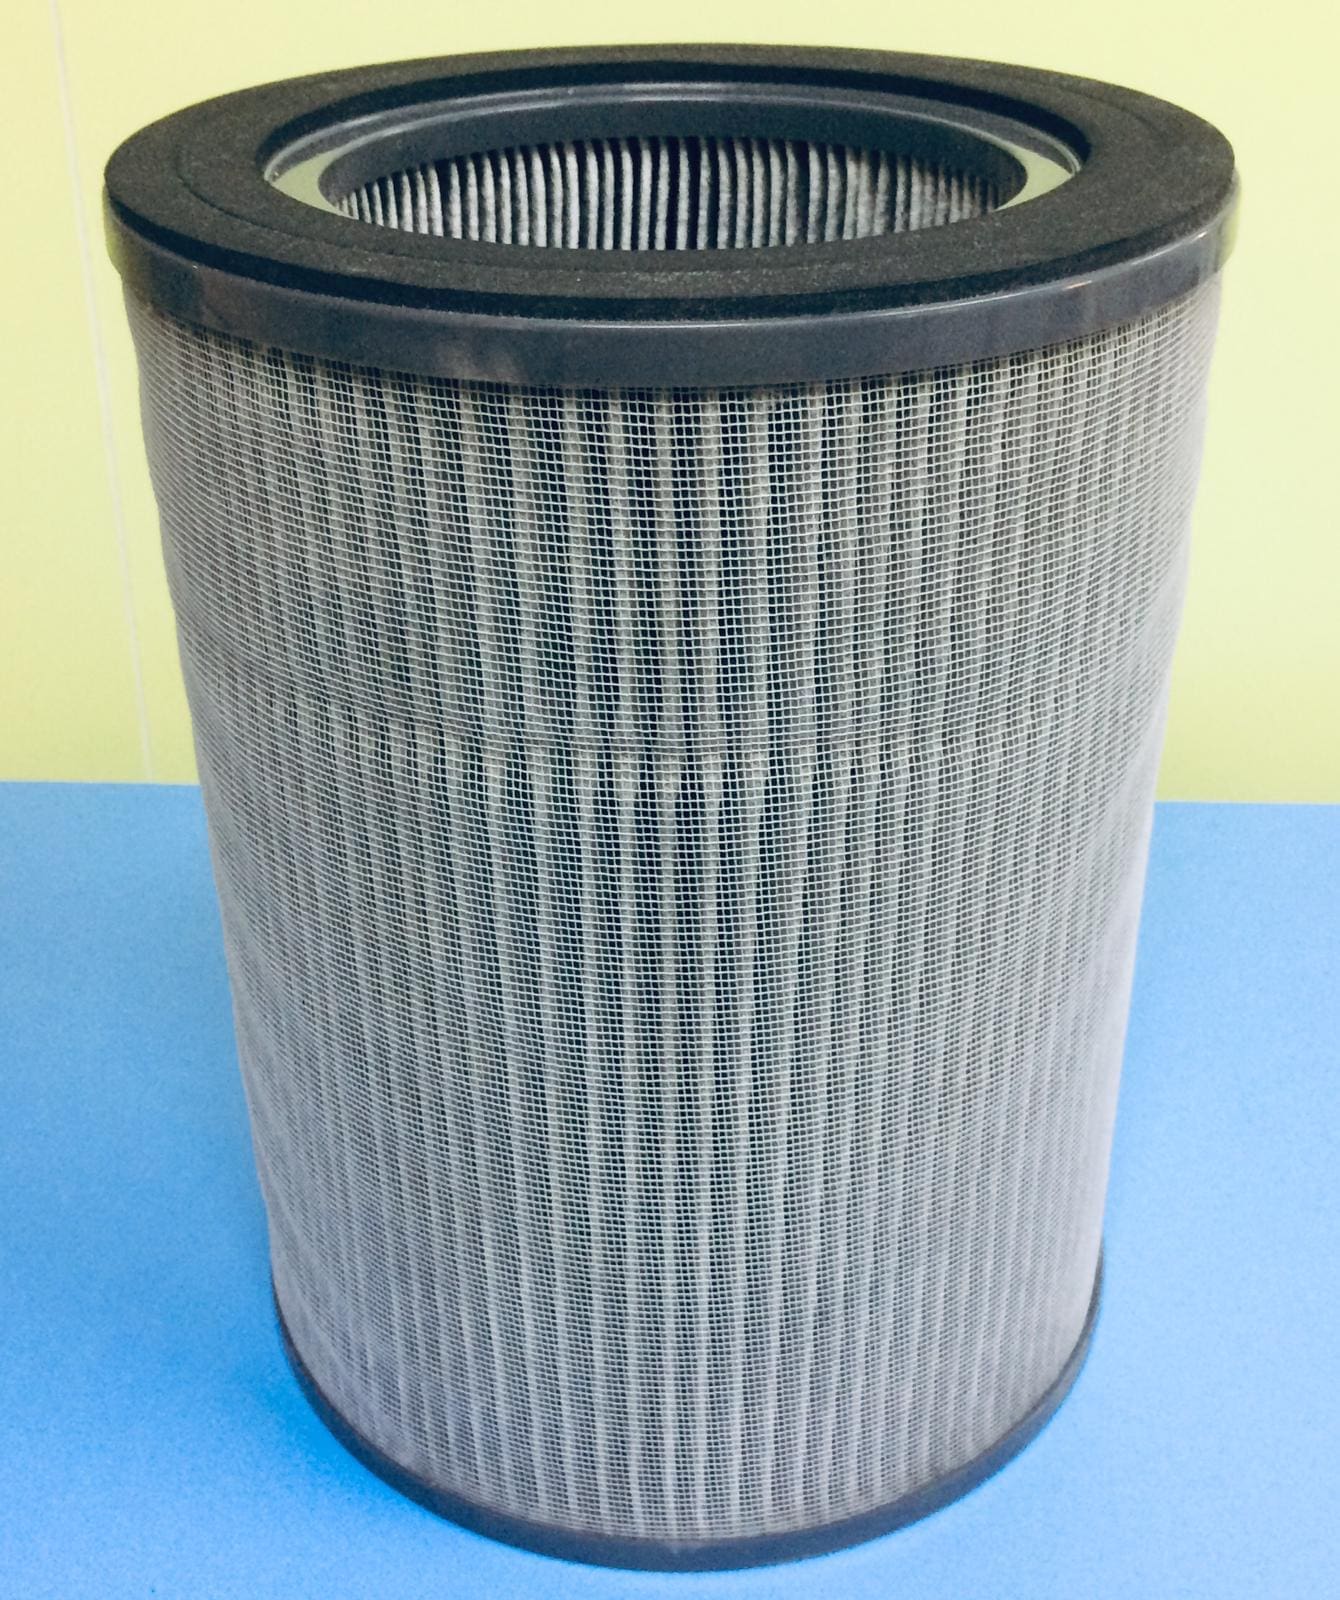 Replacement Filter for Pelucchi Round Smart Air Purifier KJ500F